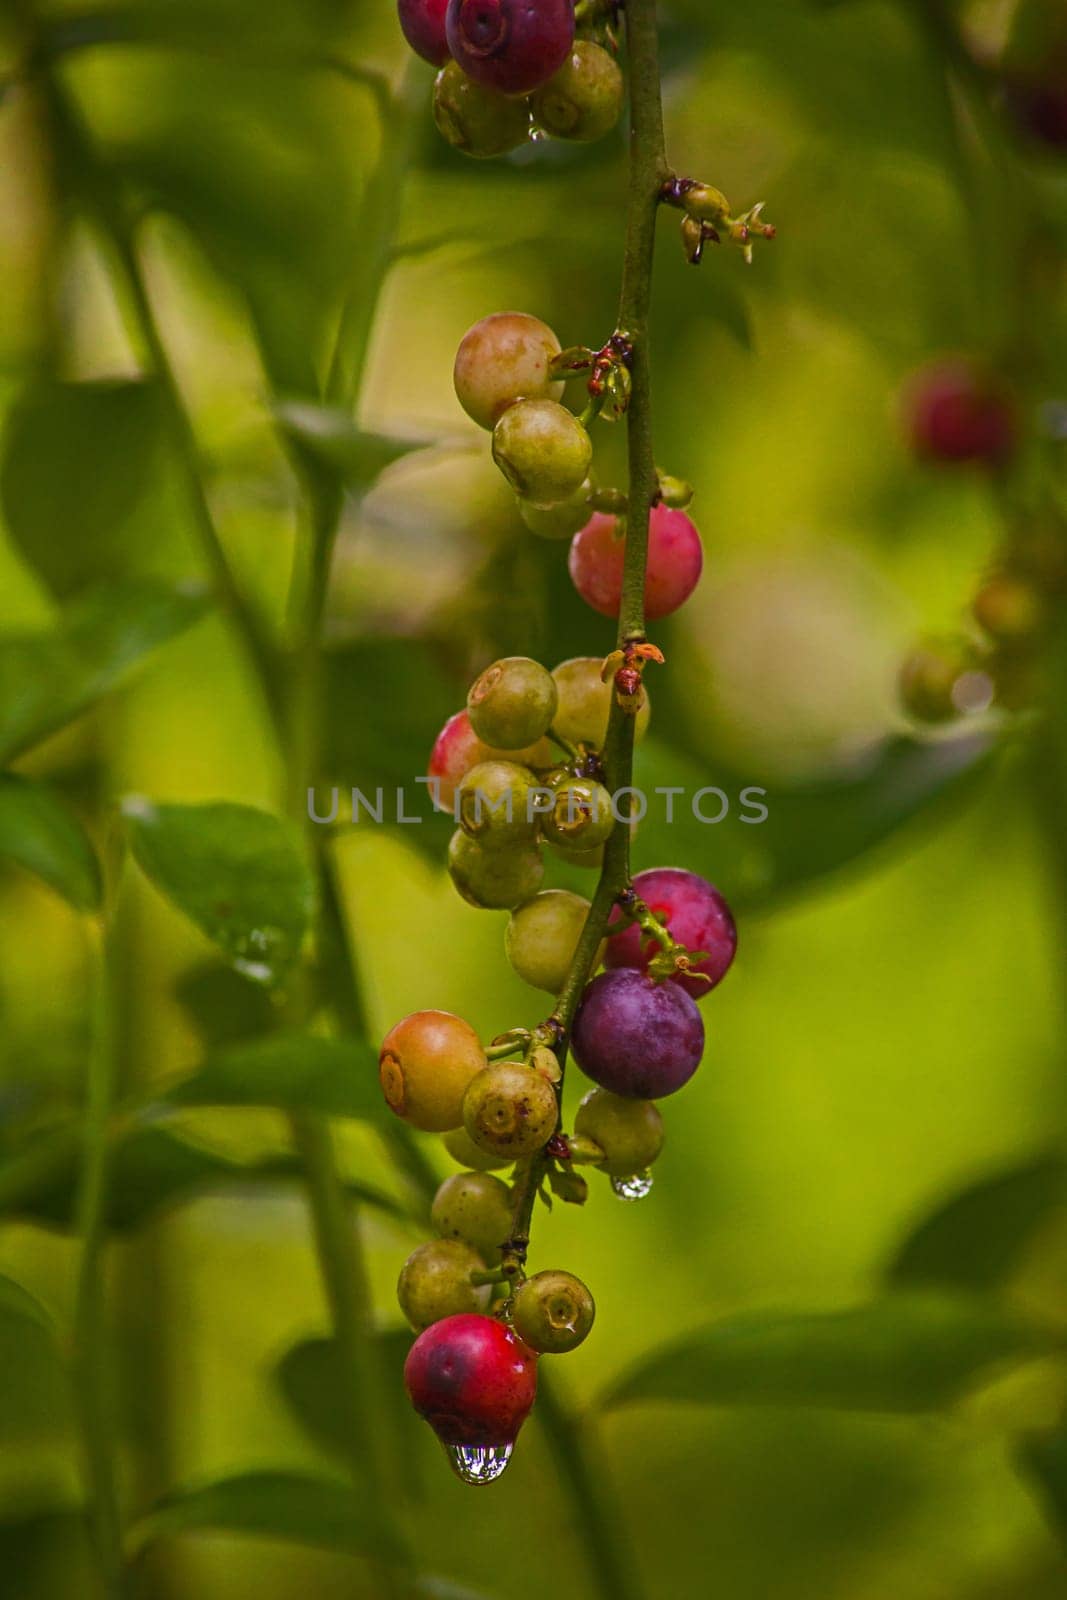 Ripening Blueberry crop 14362 by kobus_peche